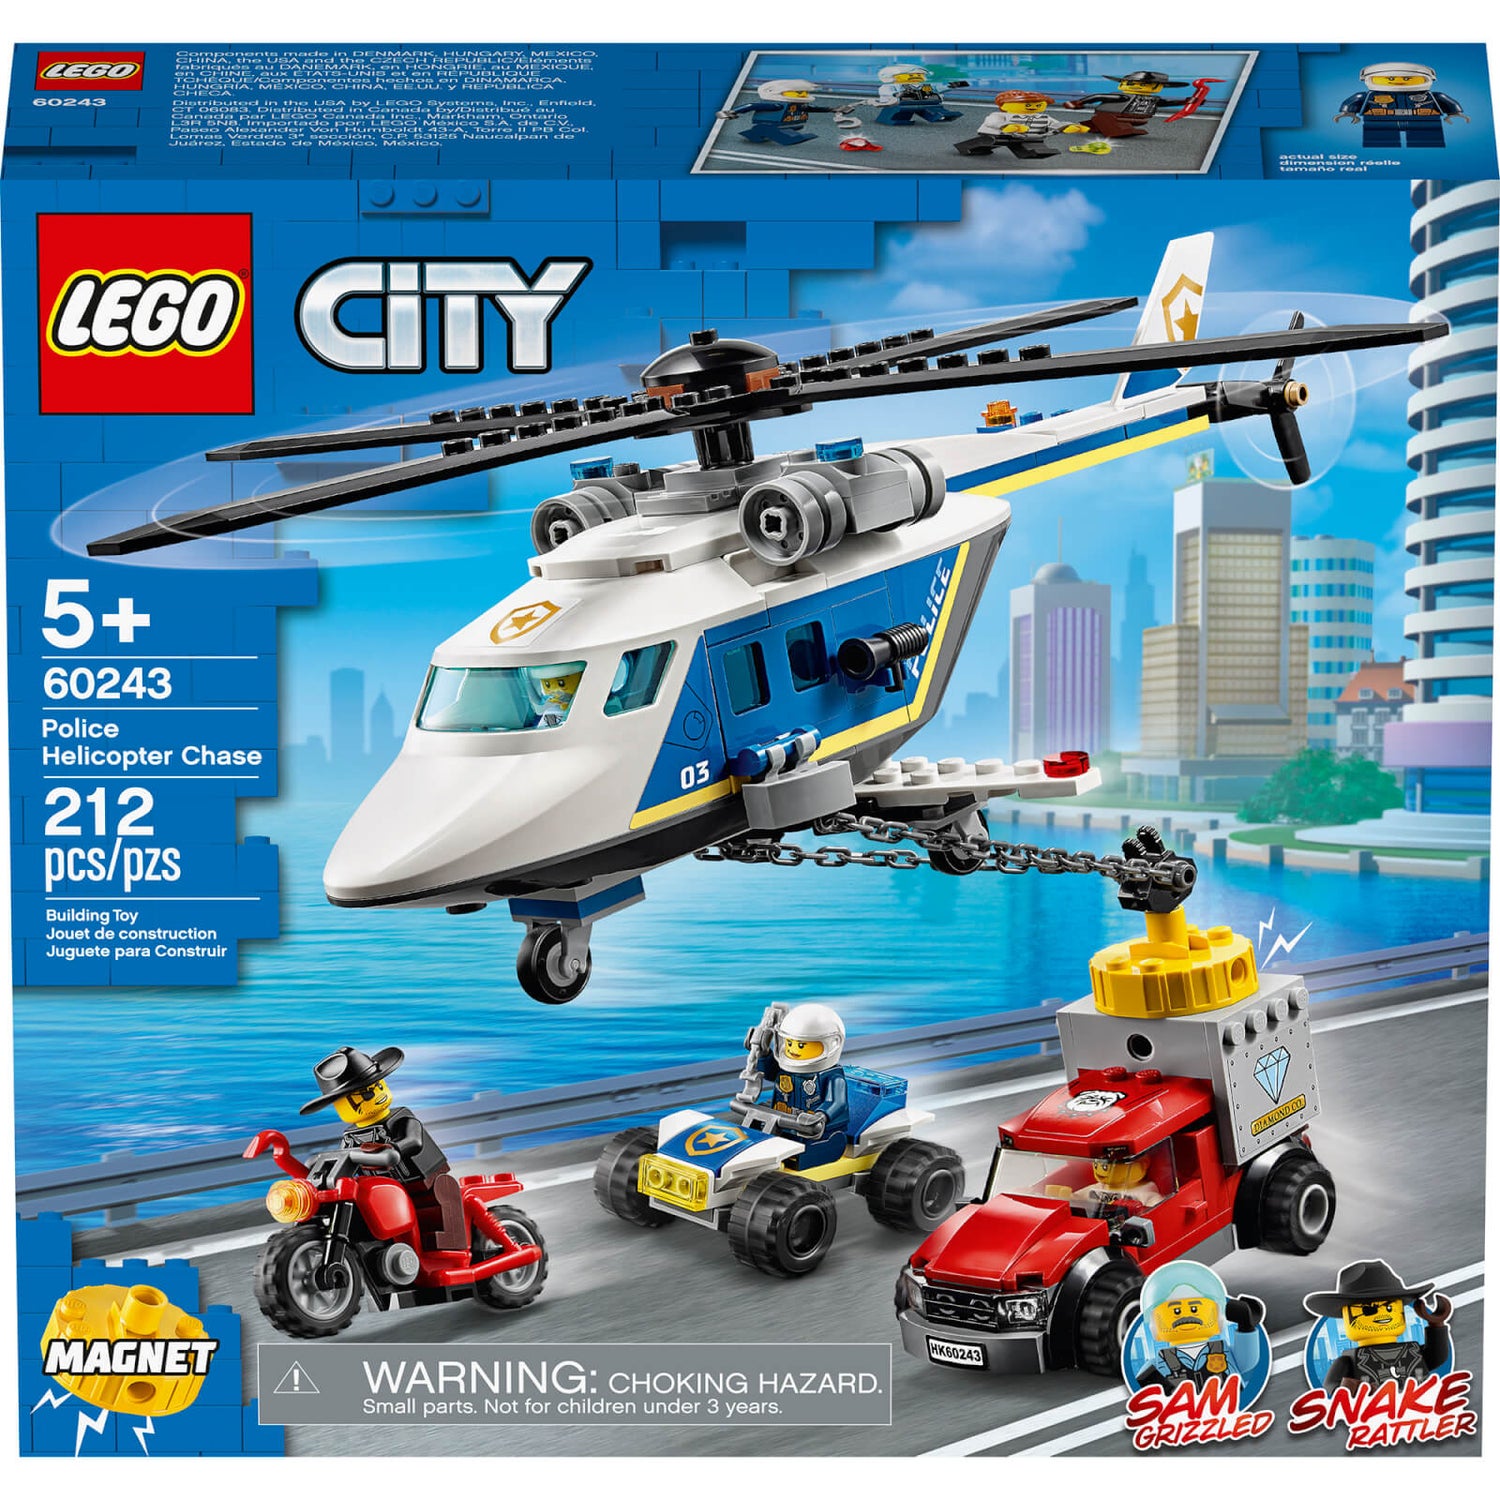 LEGO City: Police Helicopter Chase Building Set (60243)